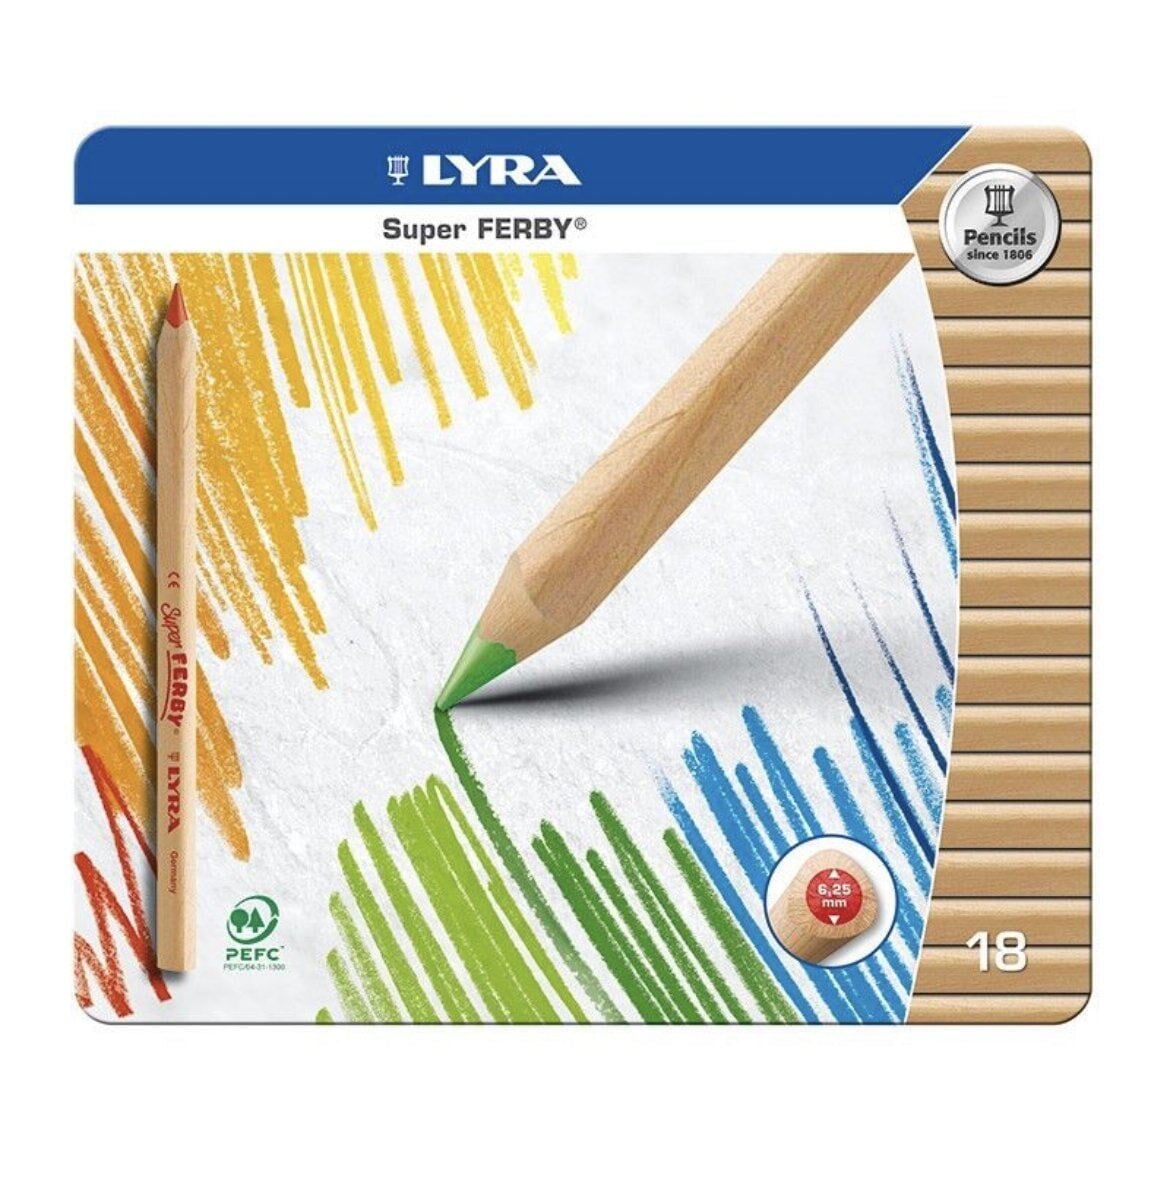 Lyra Super Ferby, 18 count Unlacquered, Assorted Colored Pencils, Metal Tin - Alder & Alouette